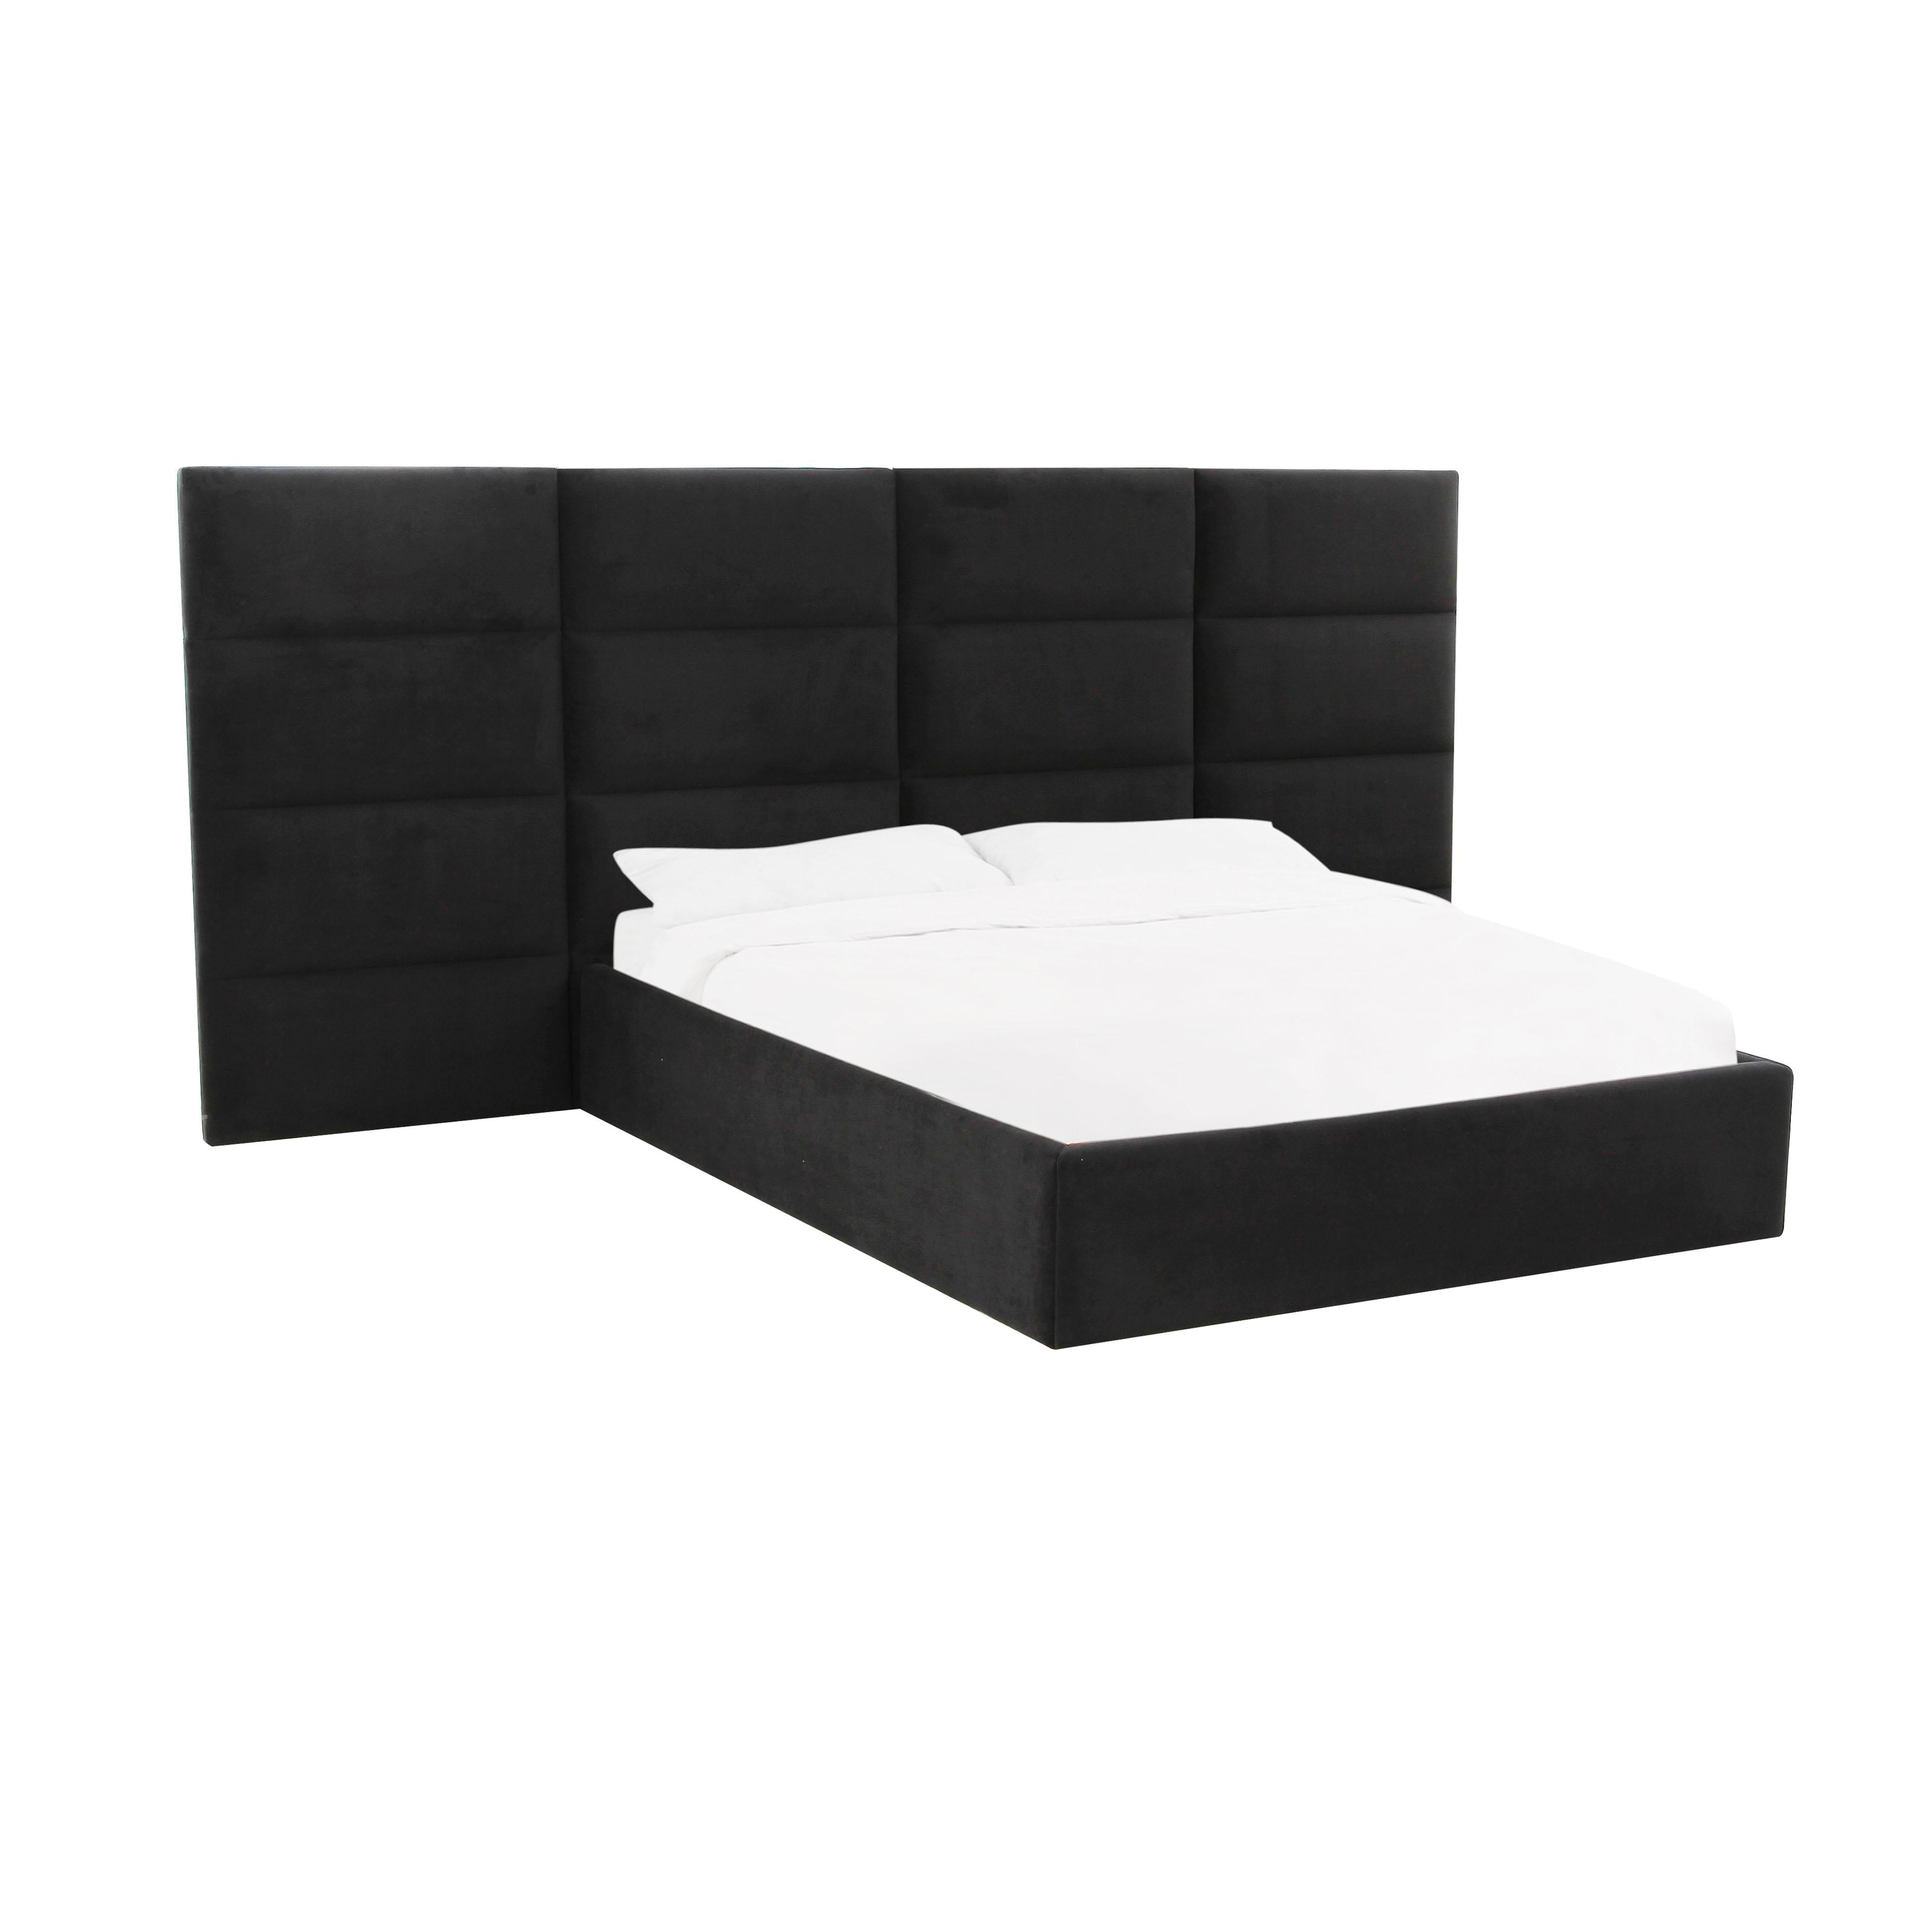 Tov Furniture Beds - Eliana Black Velvet King Bed with Wings